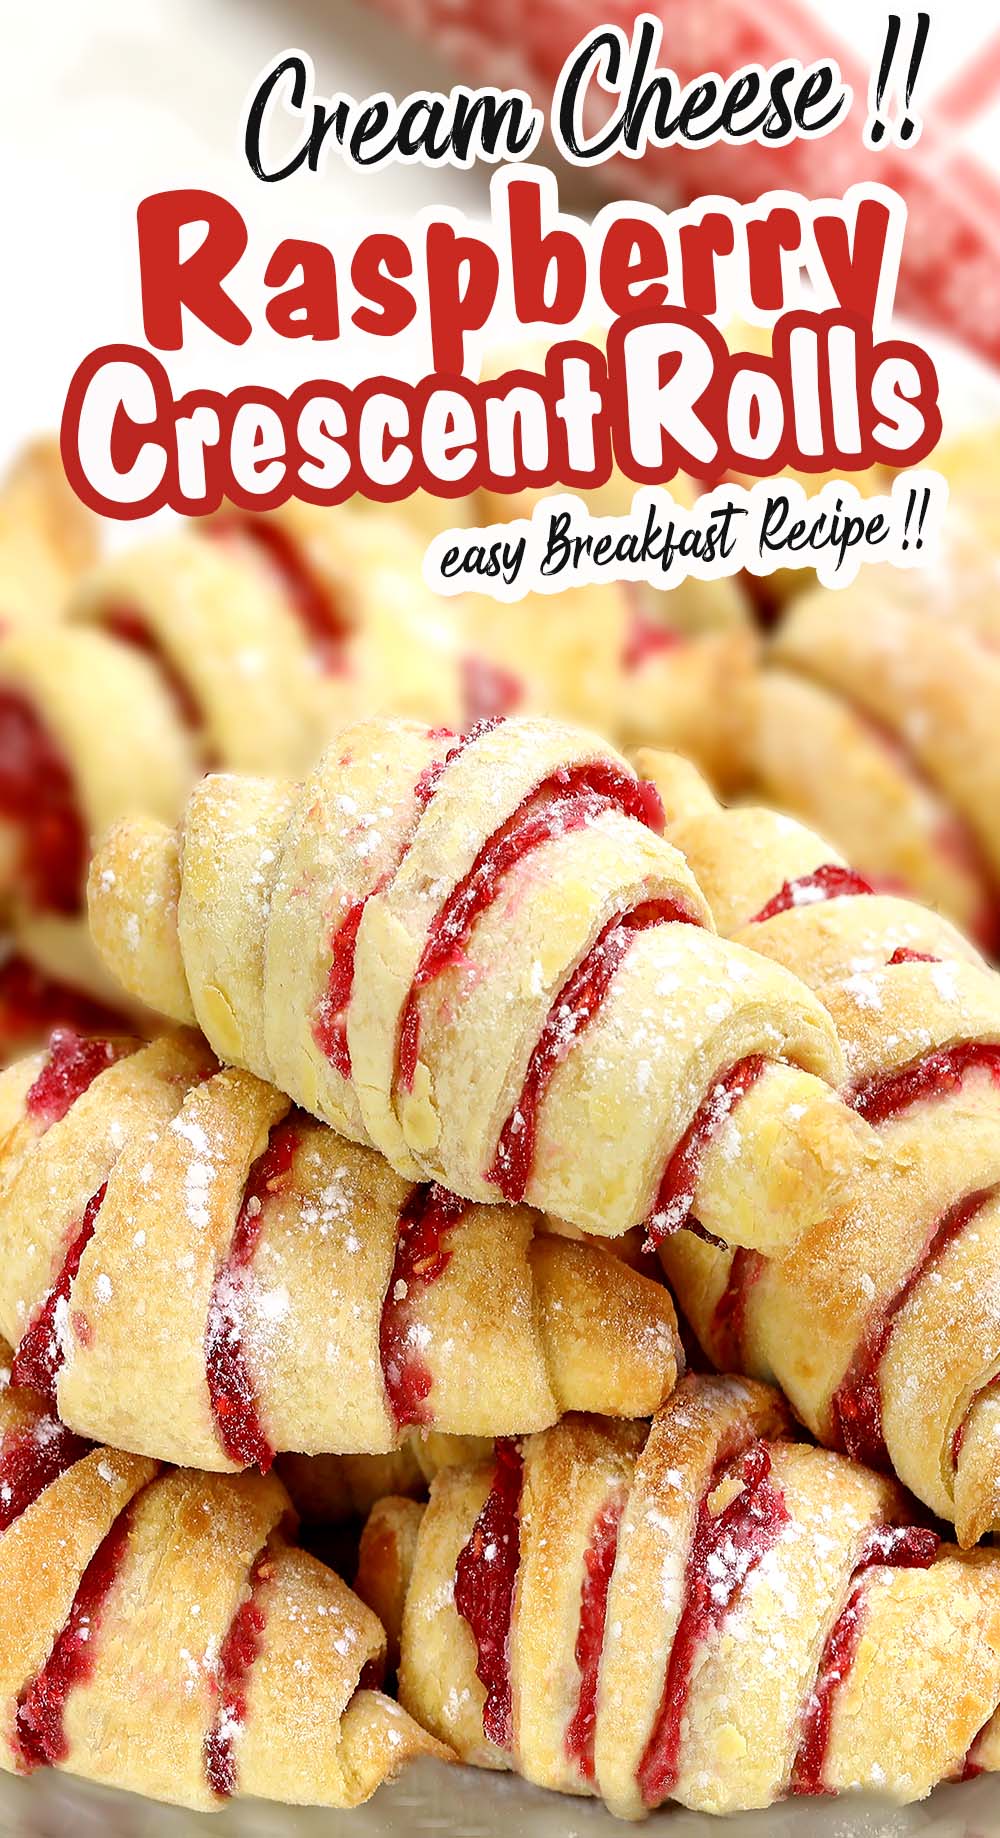 Mini Raspberry Cheesecake Crescent Rolls is a quick and easy recipe, perfect for Spring or Summer breakfast! You’ll love the amazing bright raspberry flavor.